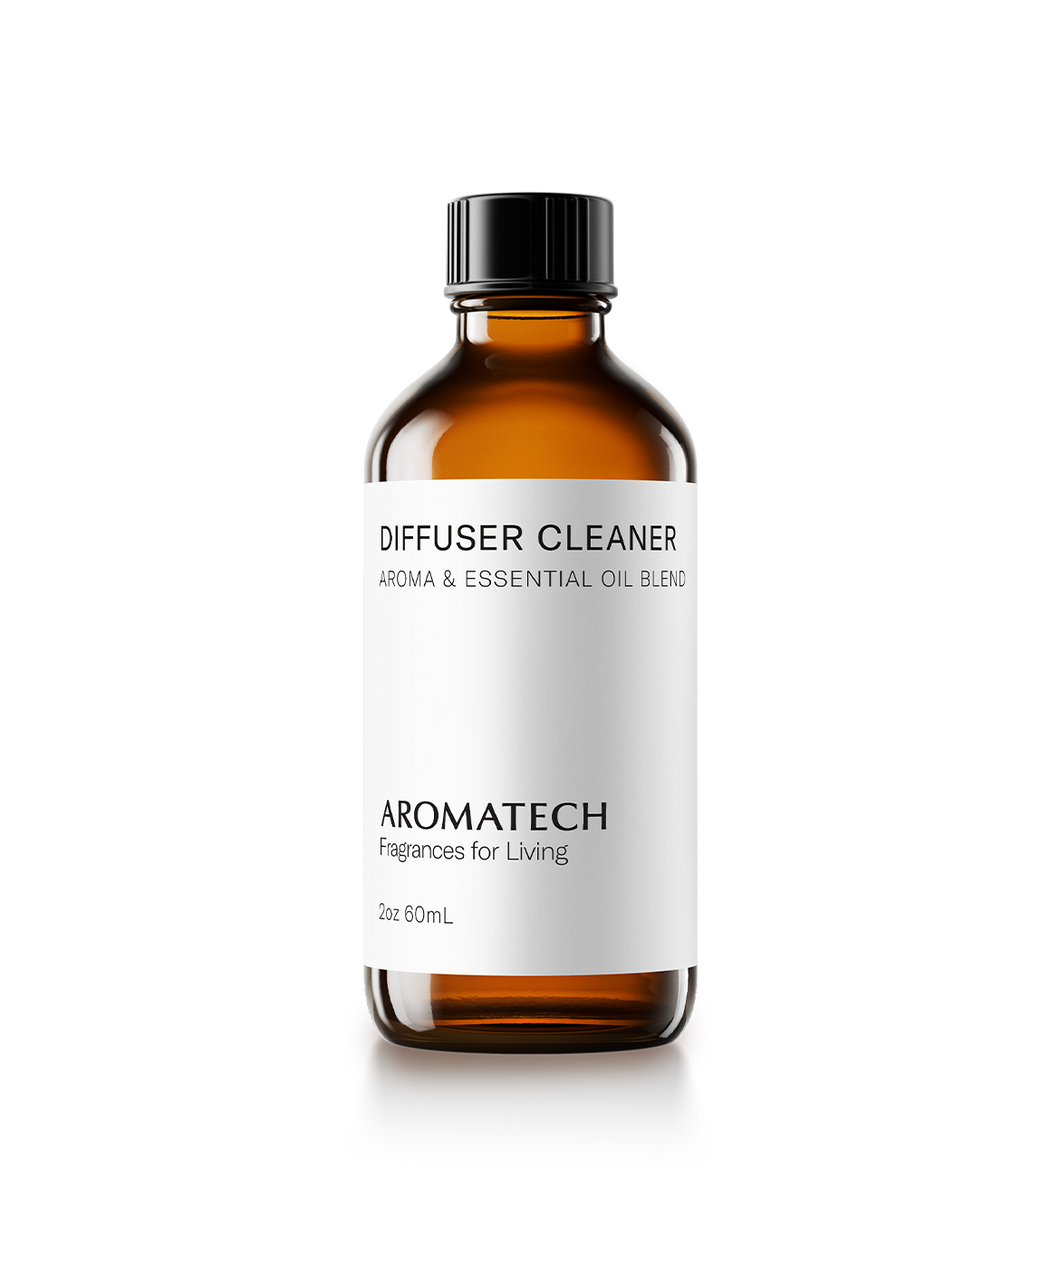 Diffuser Cleaner